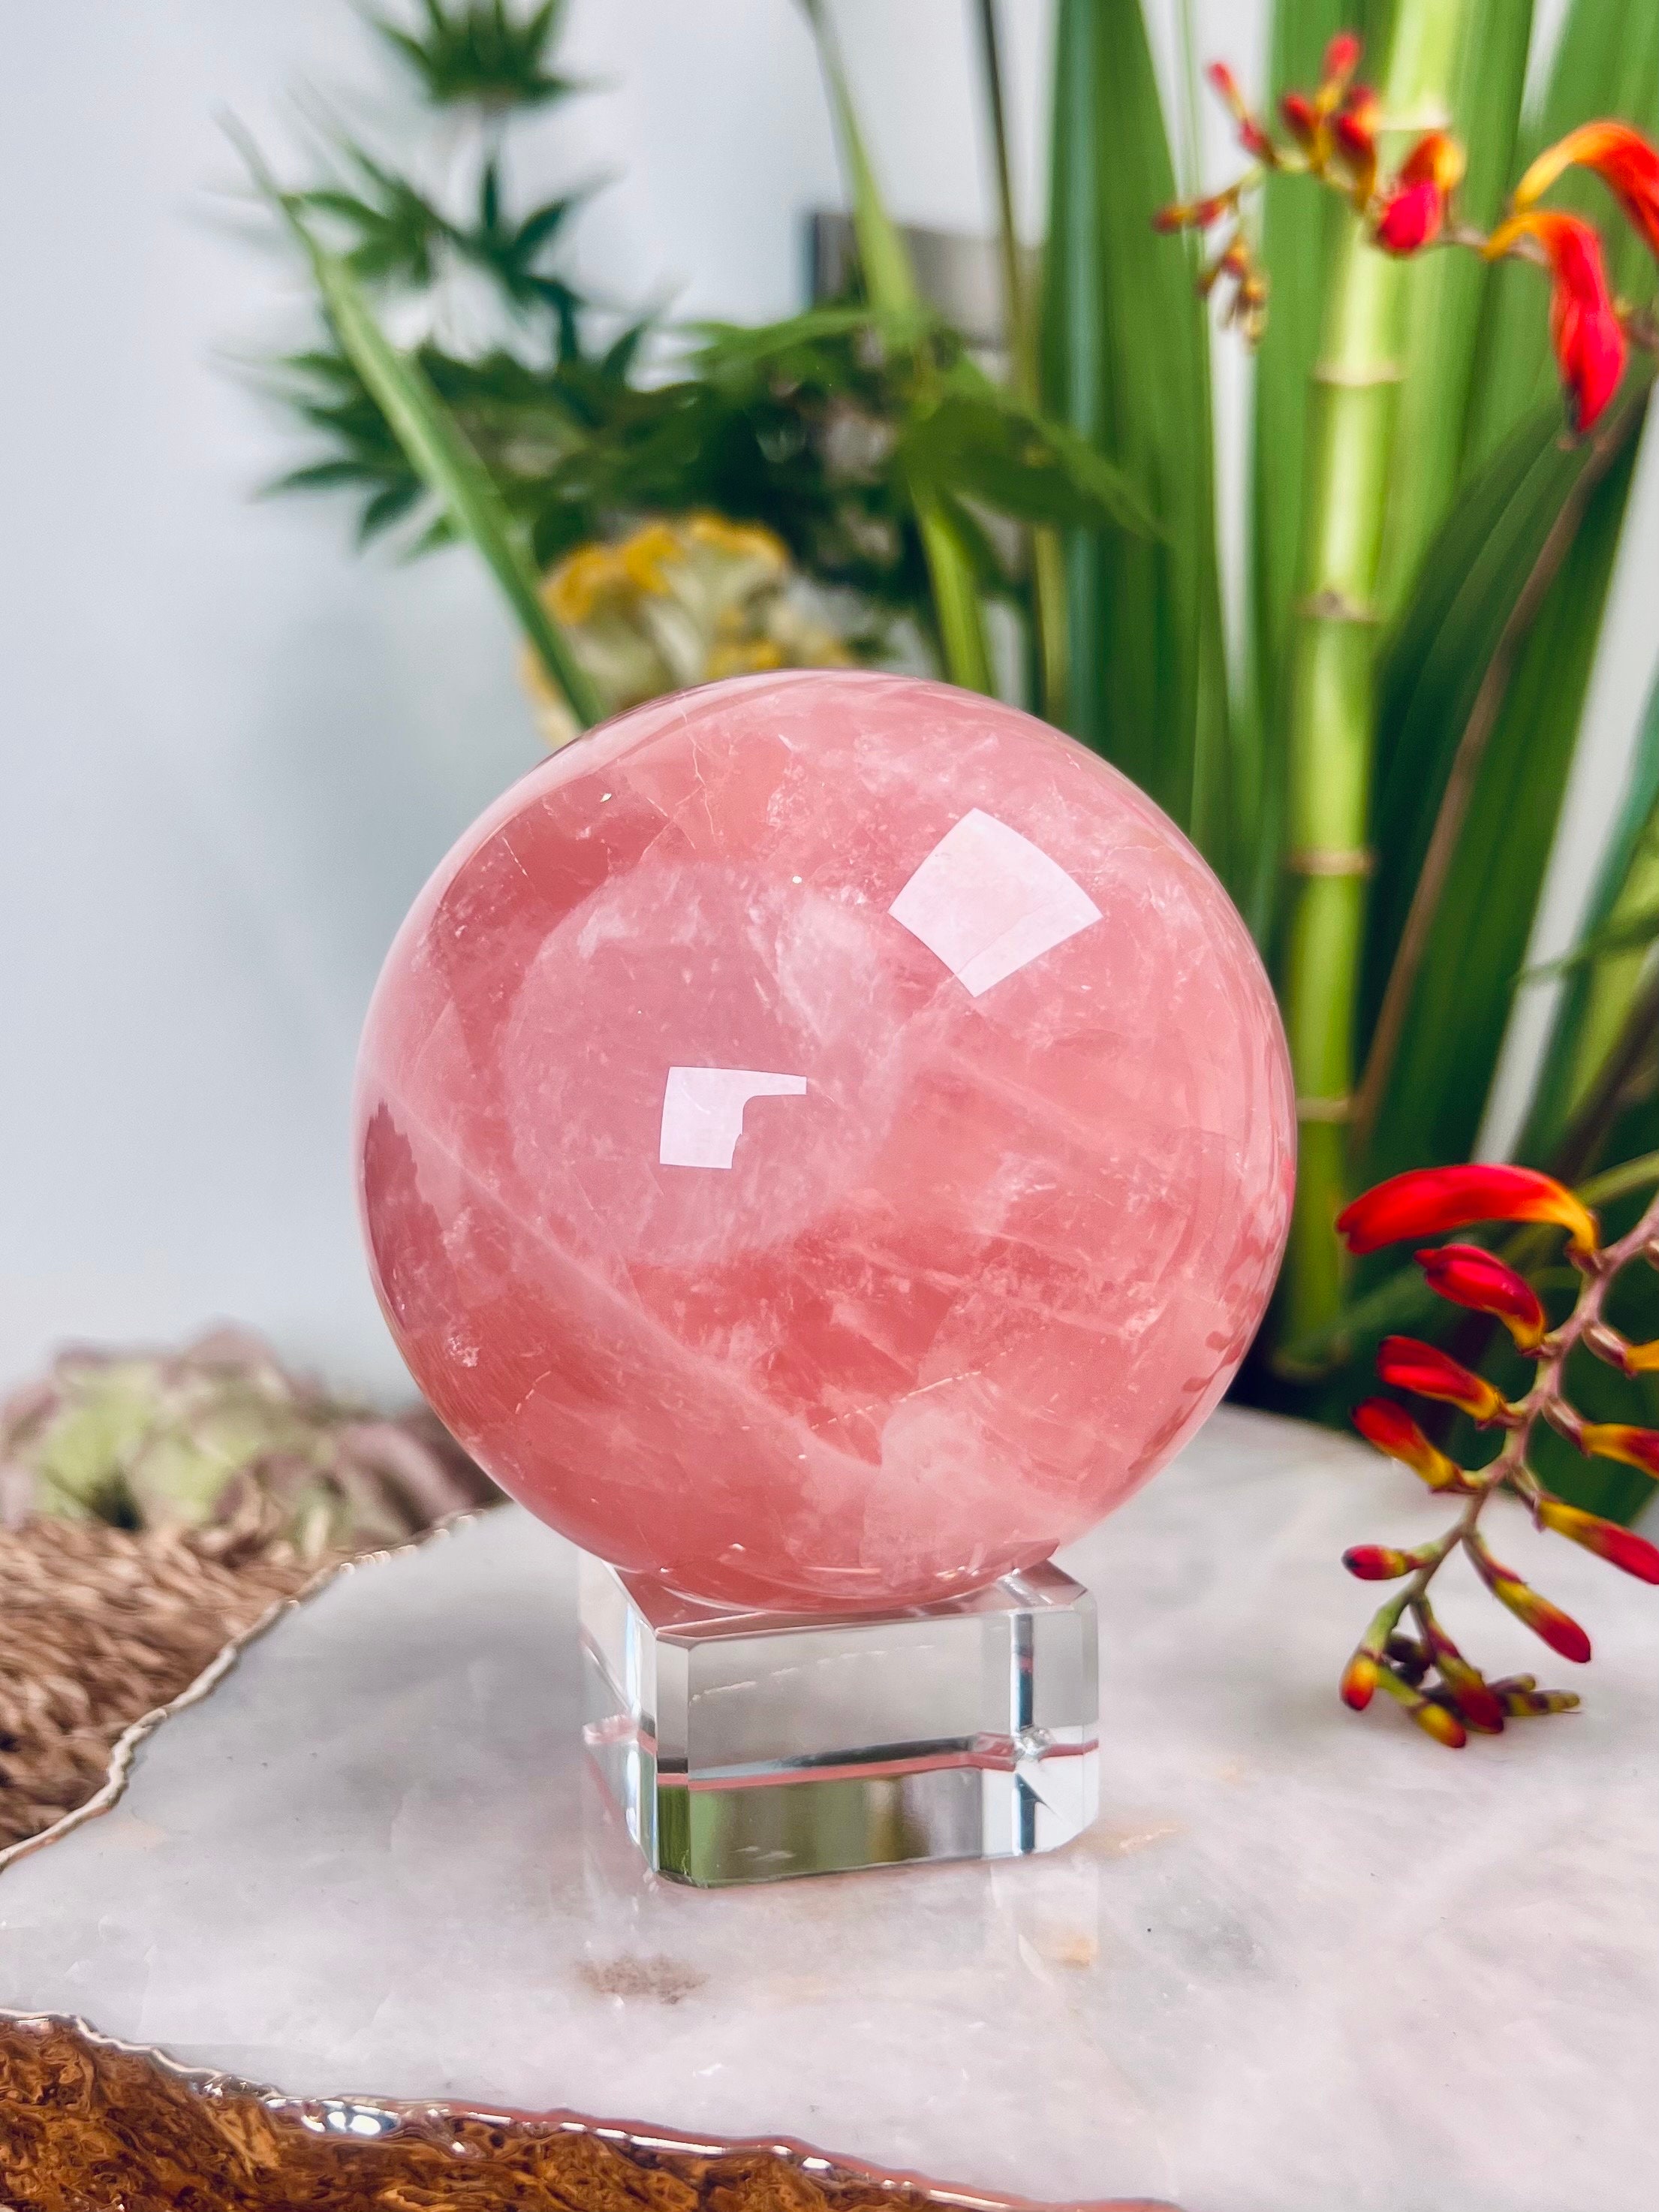 Hot Pink Crystal Ball, Love Stone Sphere, Fairy Pink Crystal Ball